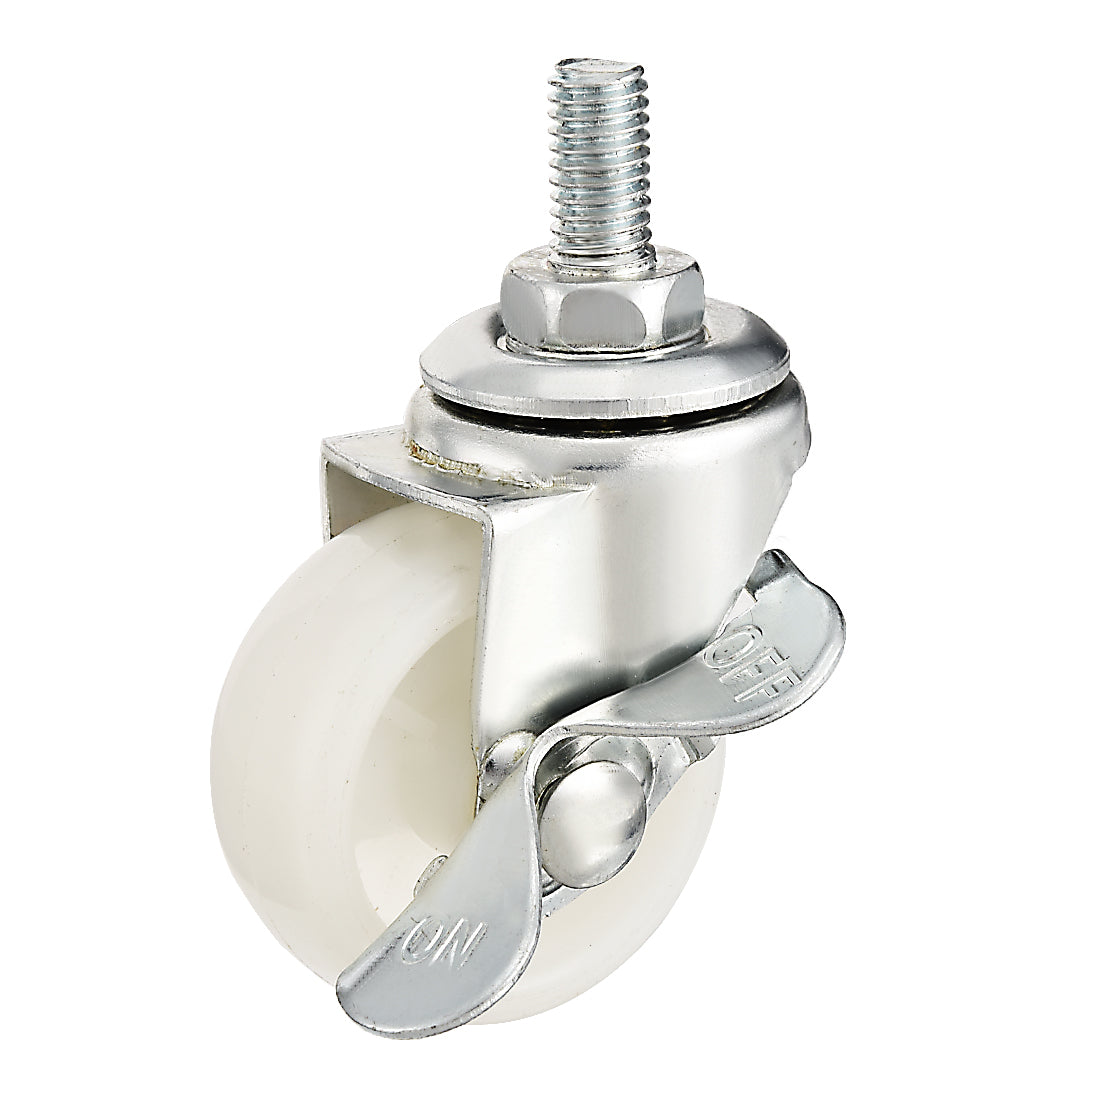 Uxcell Uxcell Swivel Casters 1.5 Inch Nylon 360 Degree M8 x 15mm Threaded Caster Wheels with Brake White 44lb Capacity 2 Pcs